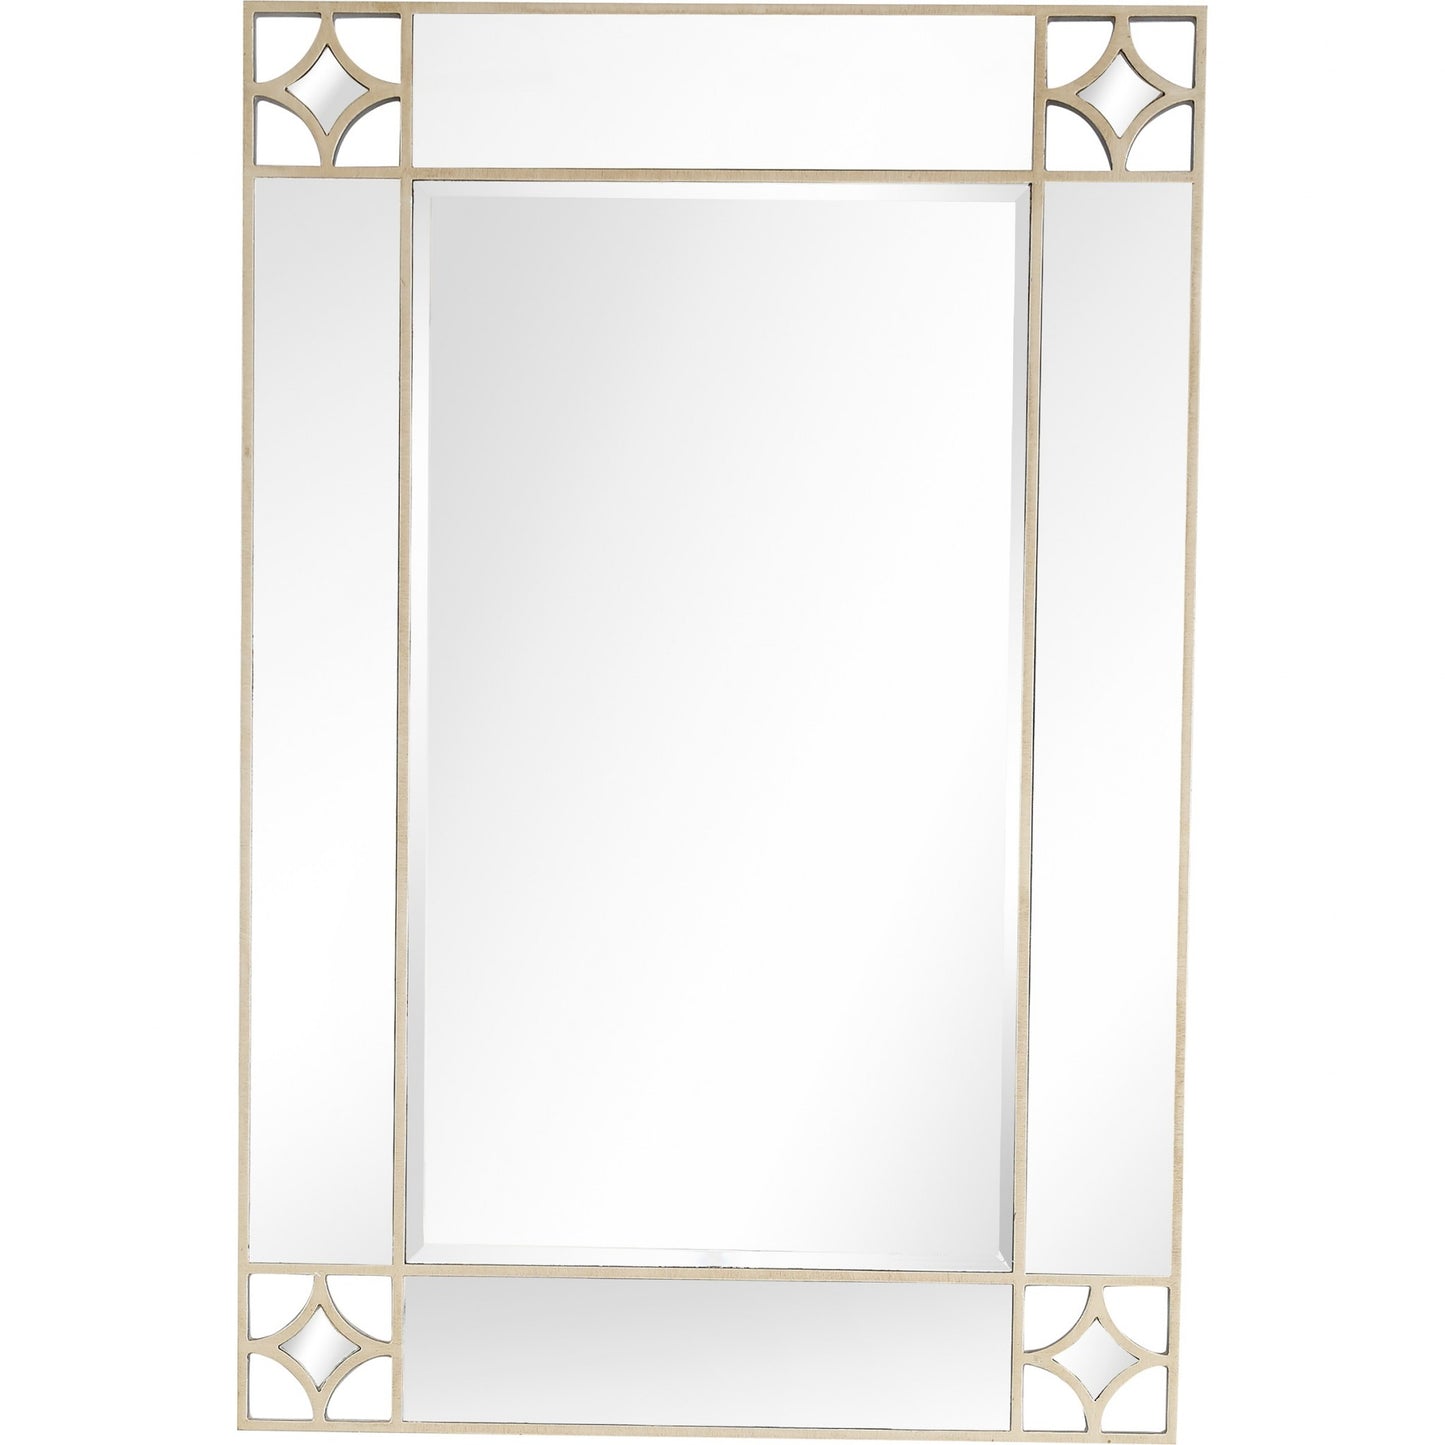 Champagne Finish Mirror and Console Table By Homeroots - 396827